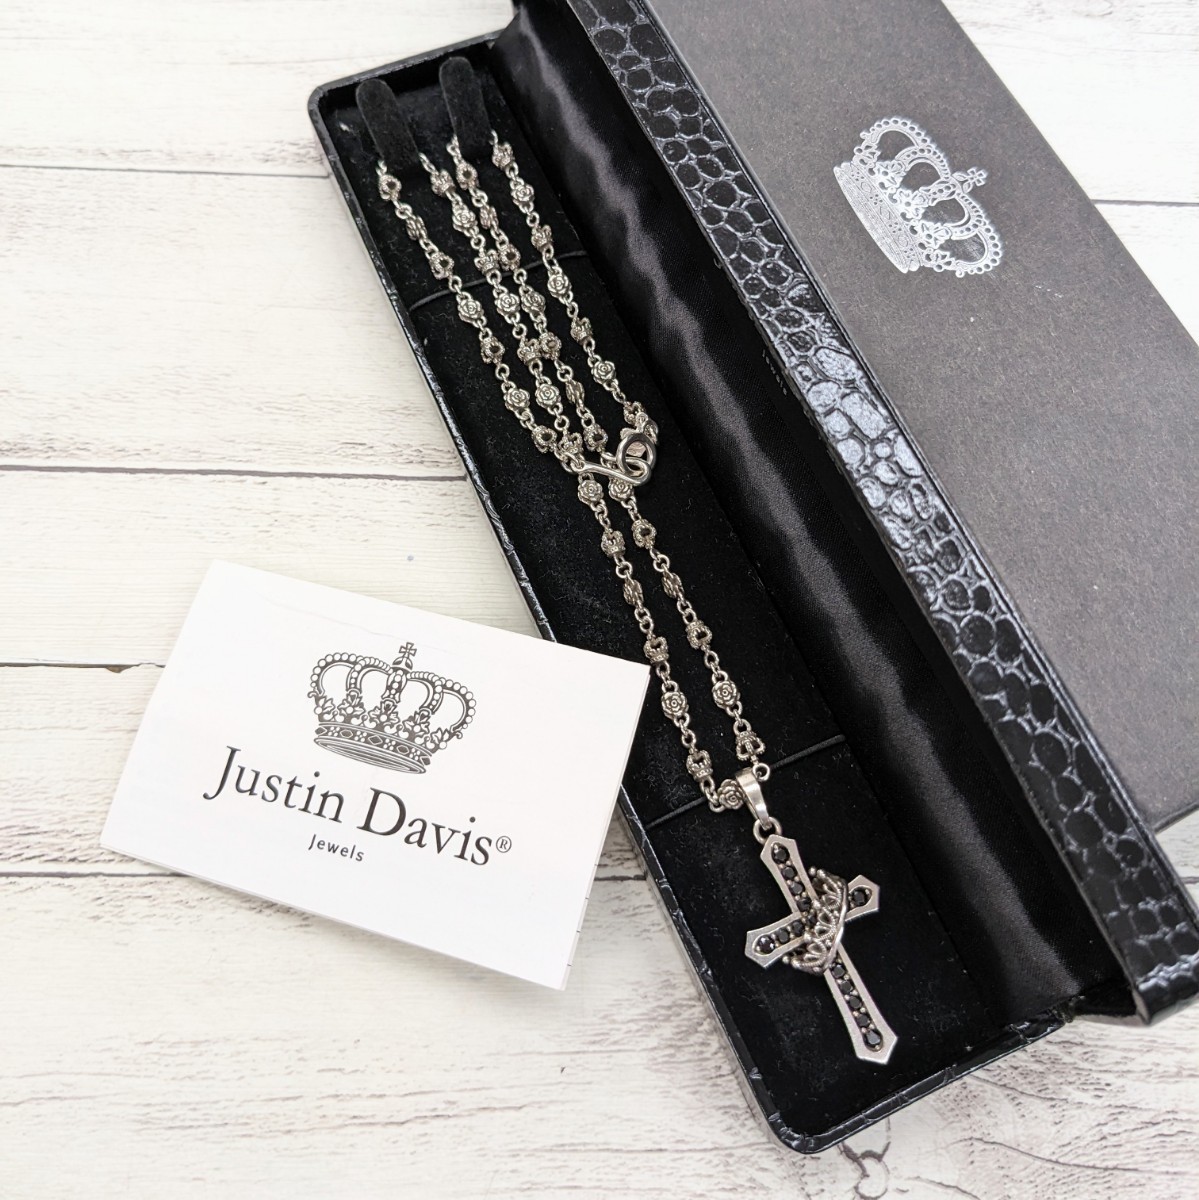 ∀ JUSTIN DAVISジャスティンデイビス CROSS WITH CROWN STONE ペンダント WICKED ROSE チェーン クロス クラウン ローズ ネックレス 王冠